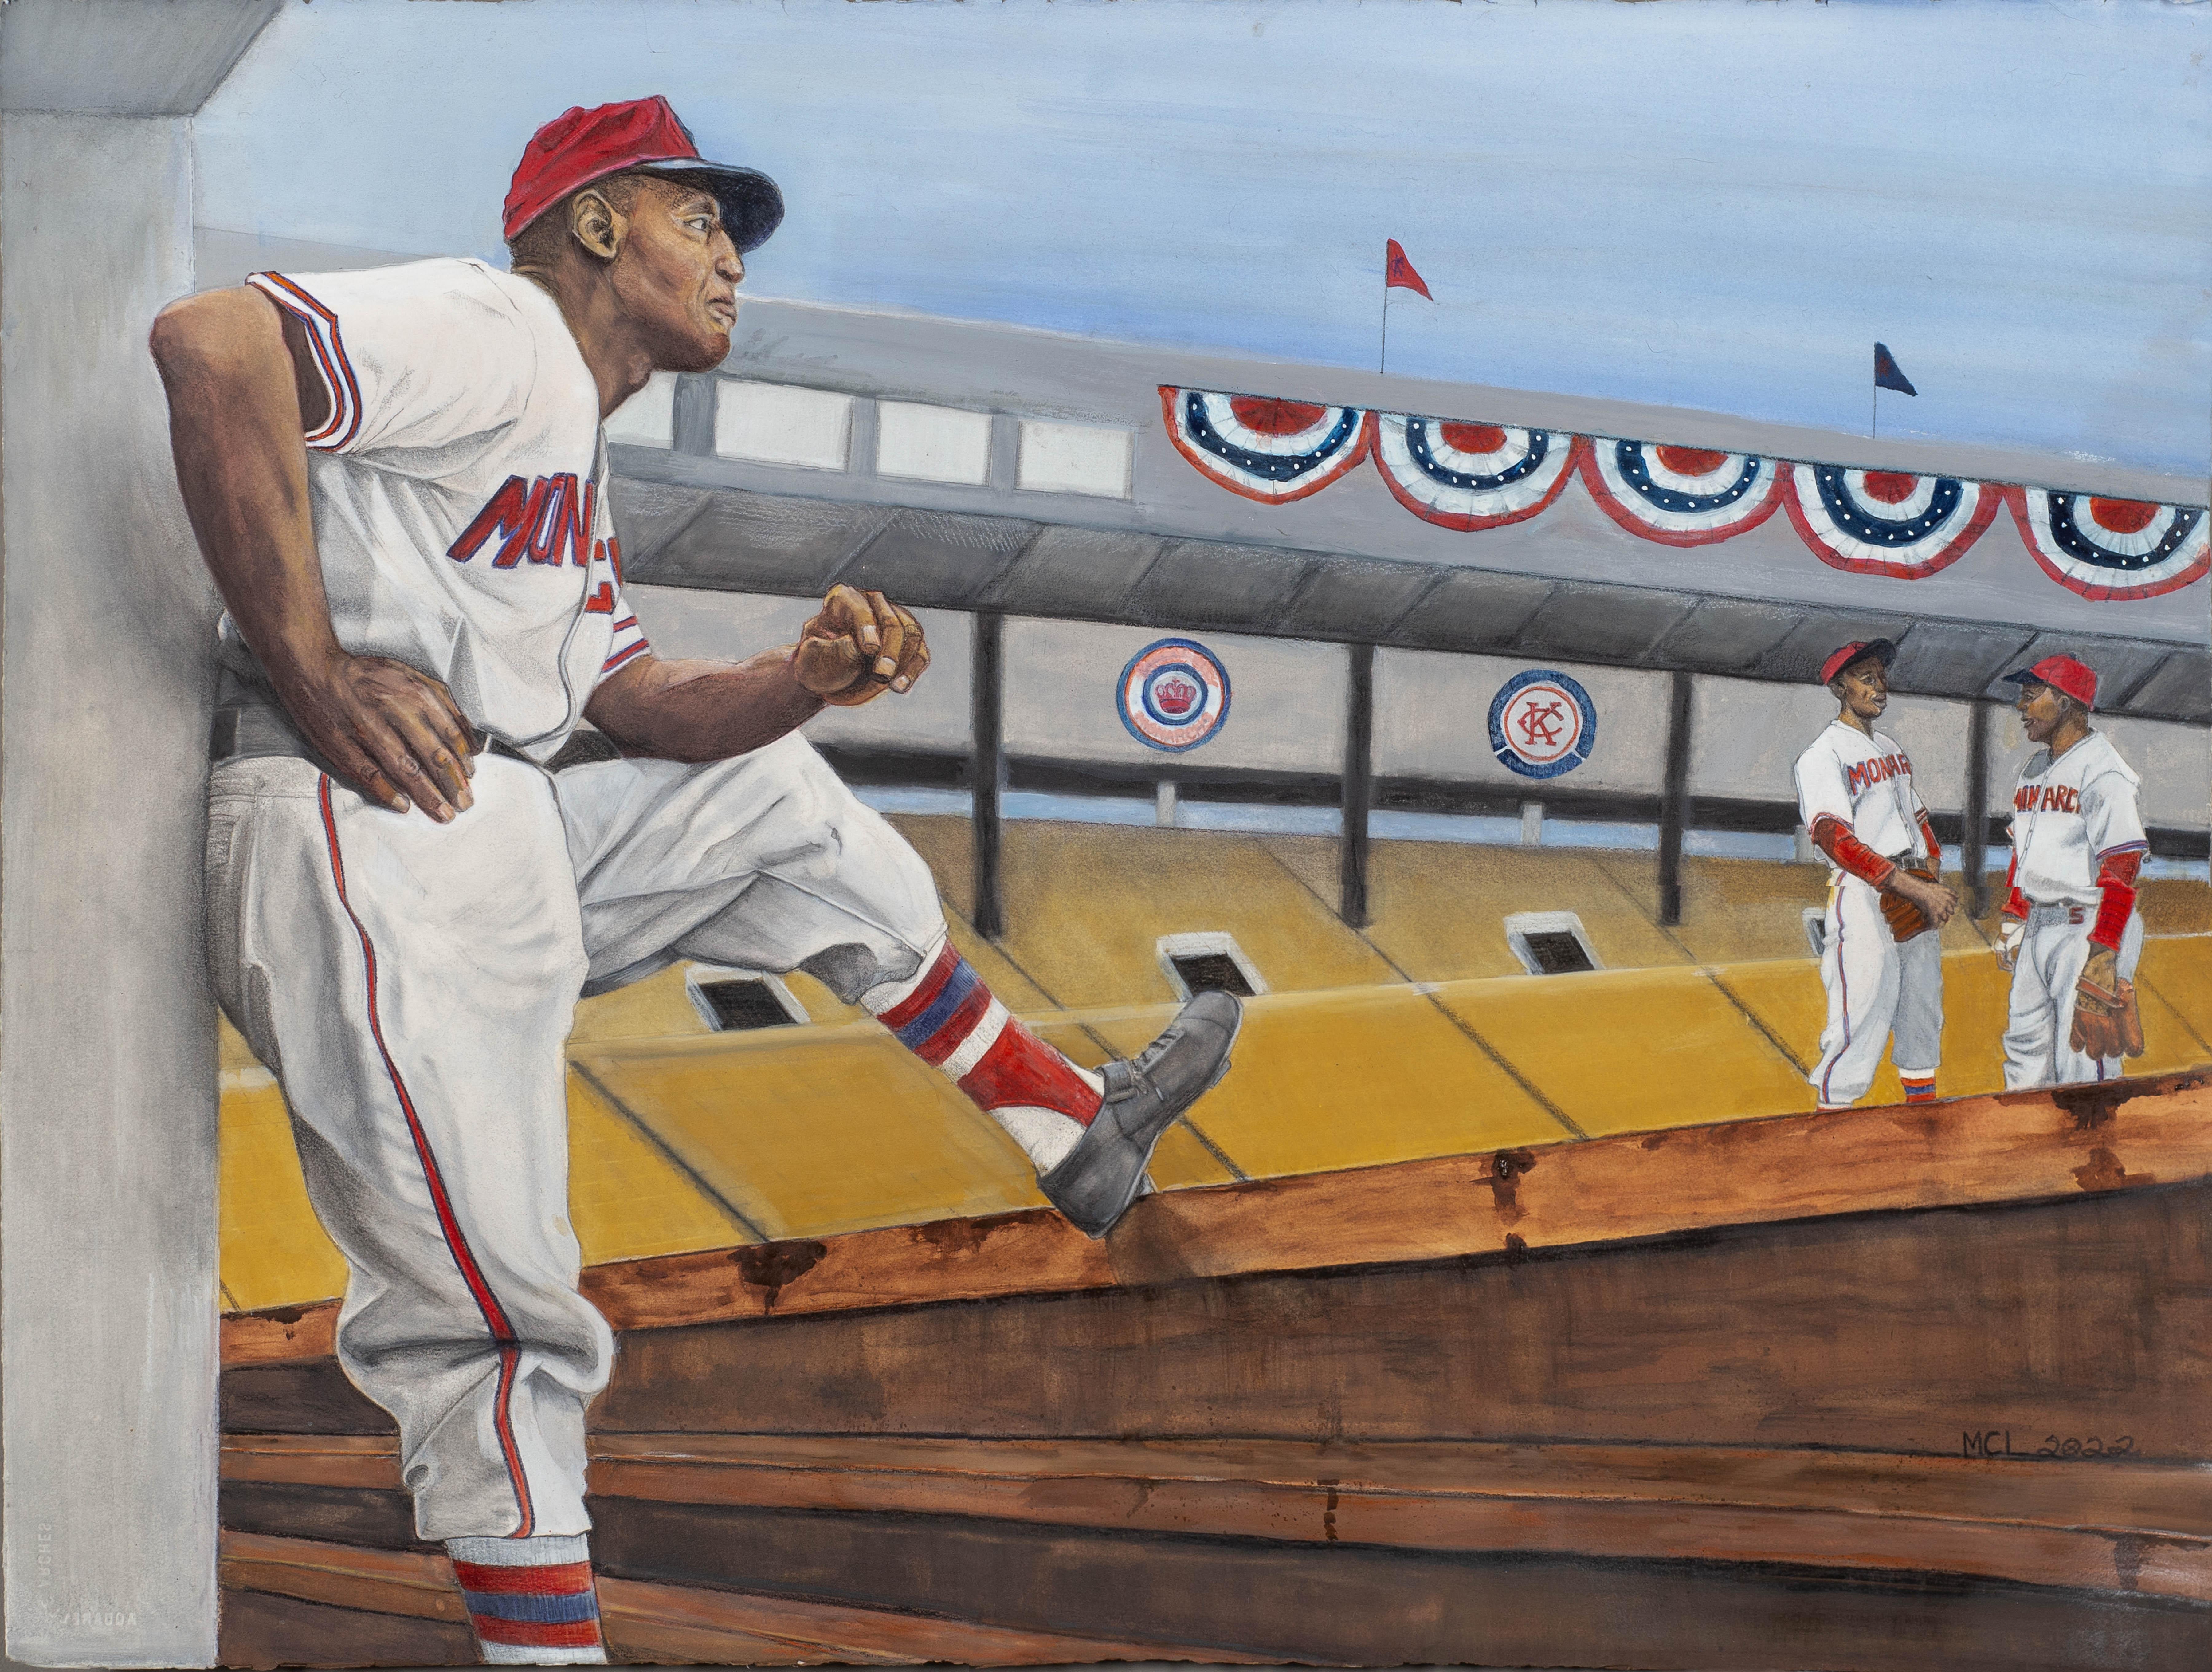 Margie Lawrence Figurative Painting – Schnallenschnalle O''Neil, Schultertasche & Jackie Robinson - Baseball Greats, gerahmtes Aquarell